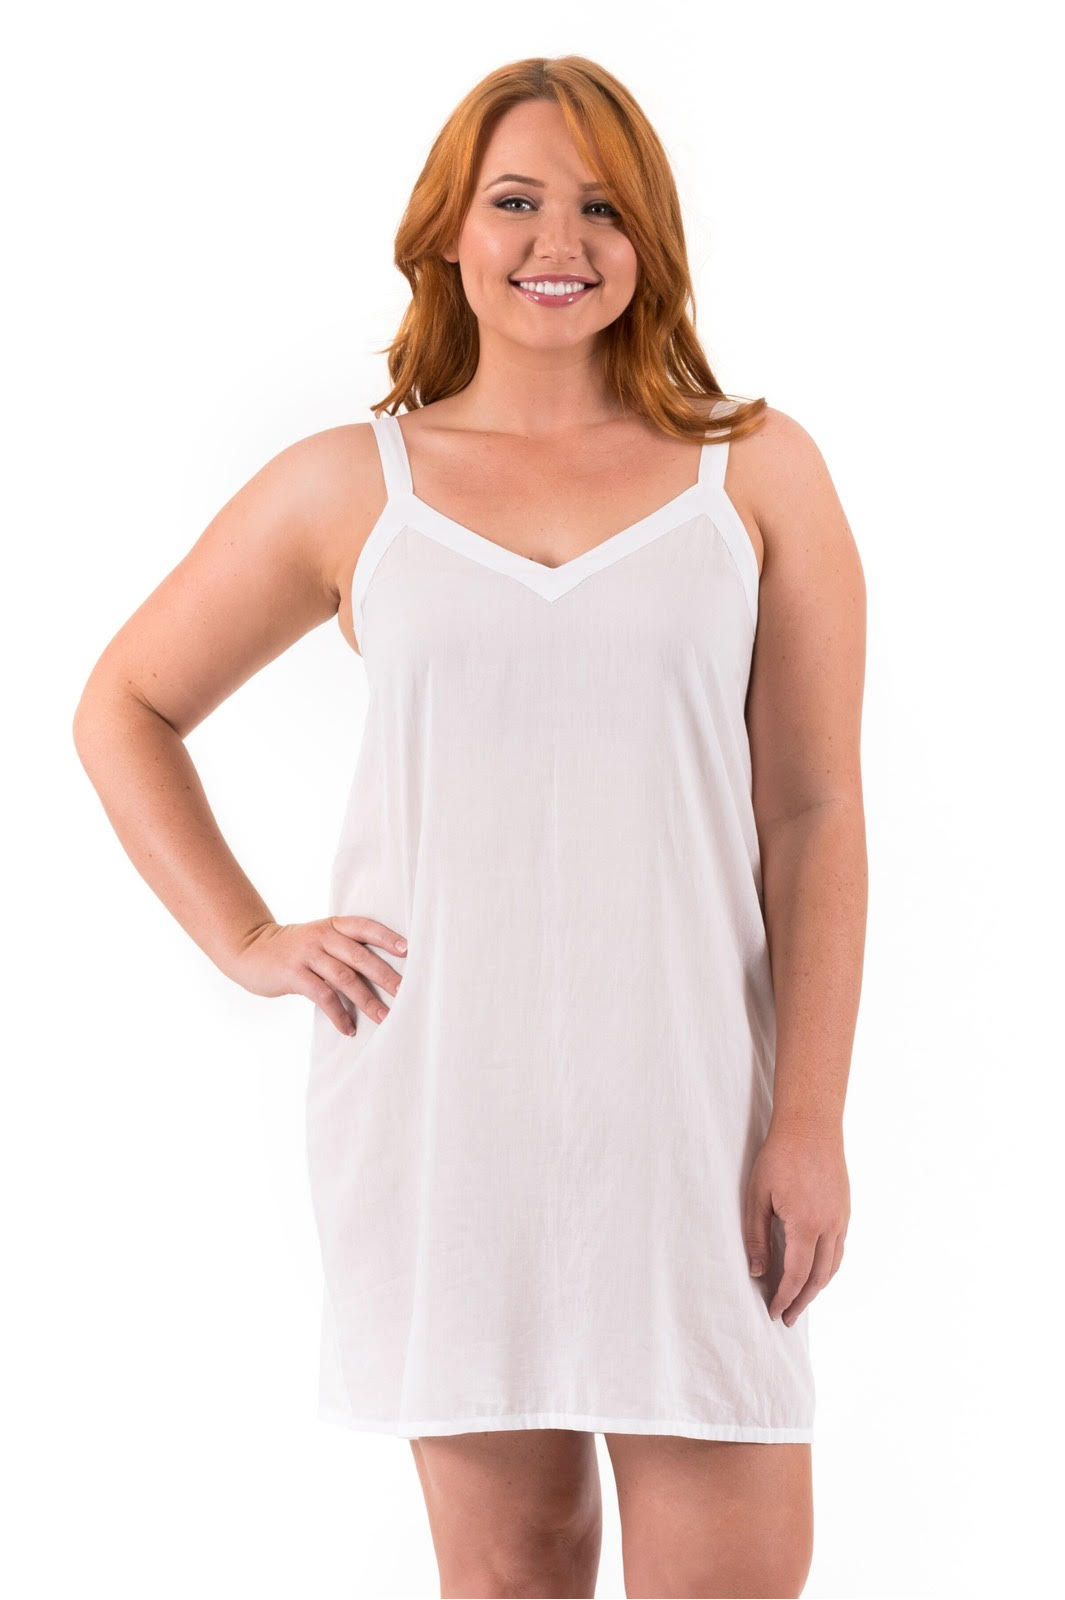 Plus Size Cotton Slip - cool and comfortable slip for extra coverage